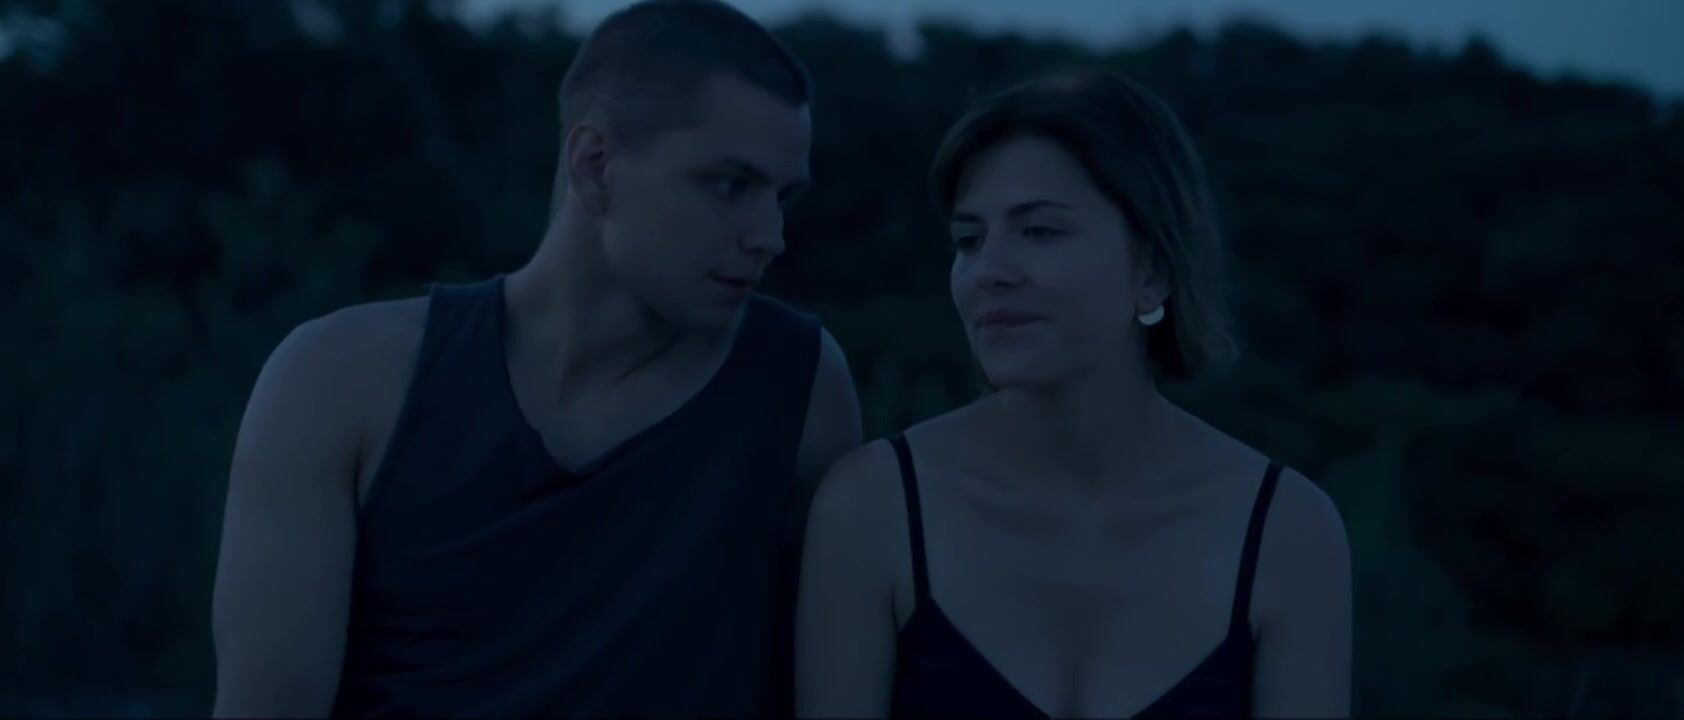 Gay Bus Boy gives everything to Evgeniya Gromova just to hump her in Russian film Fidelity (2019) Morrita